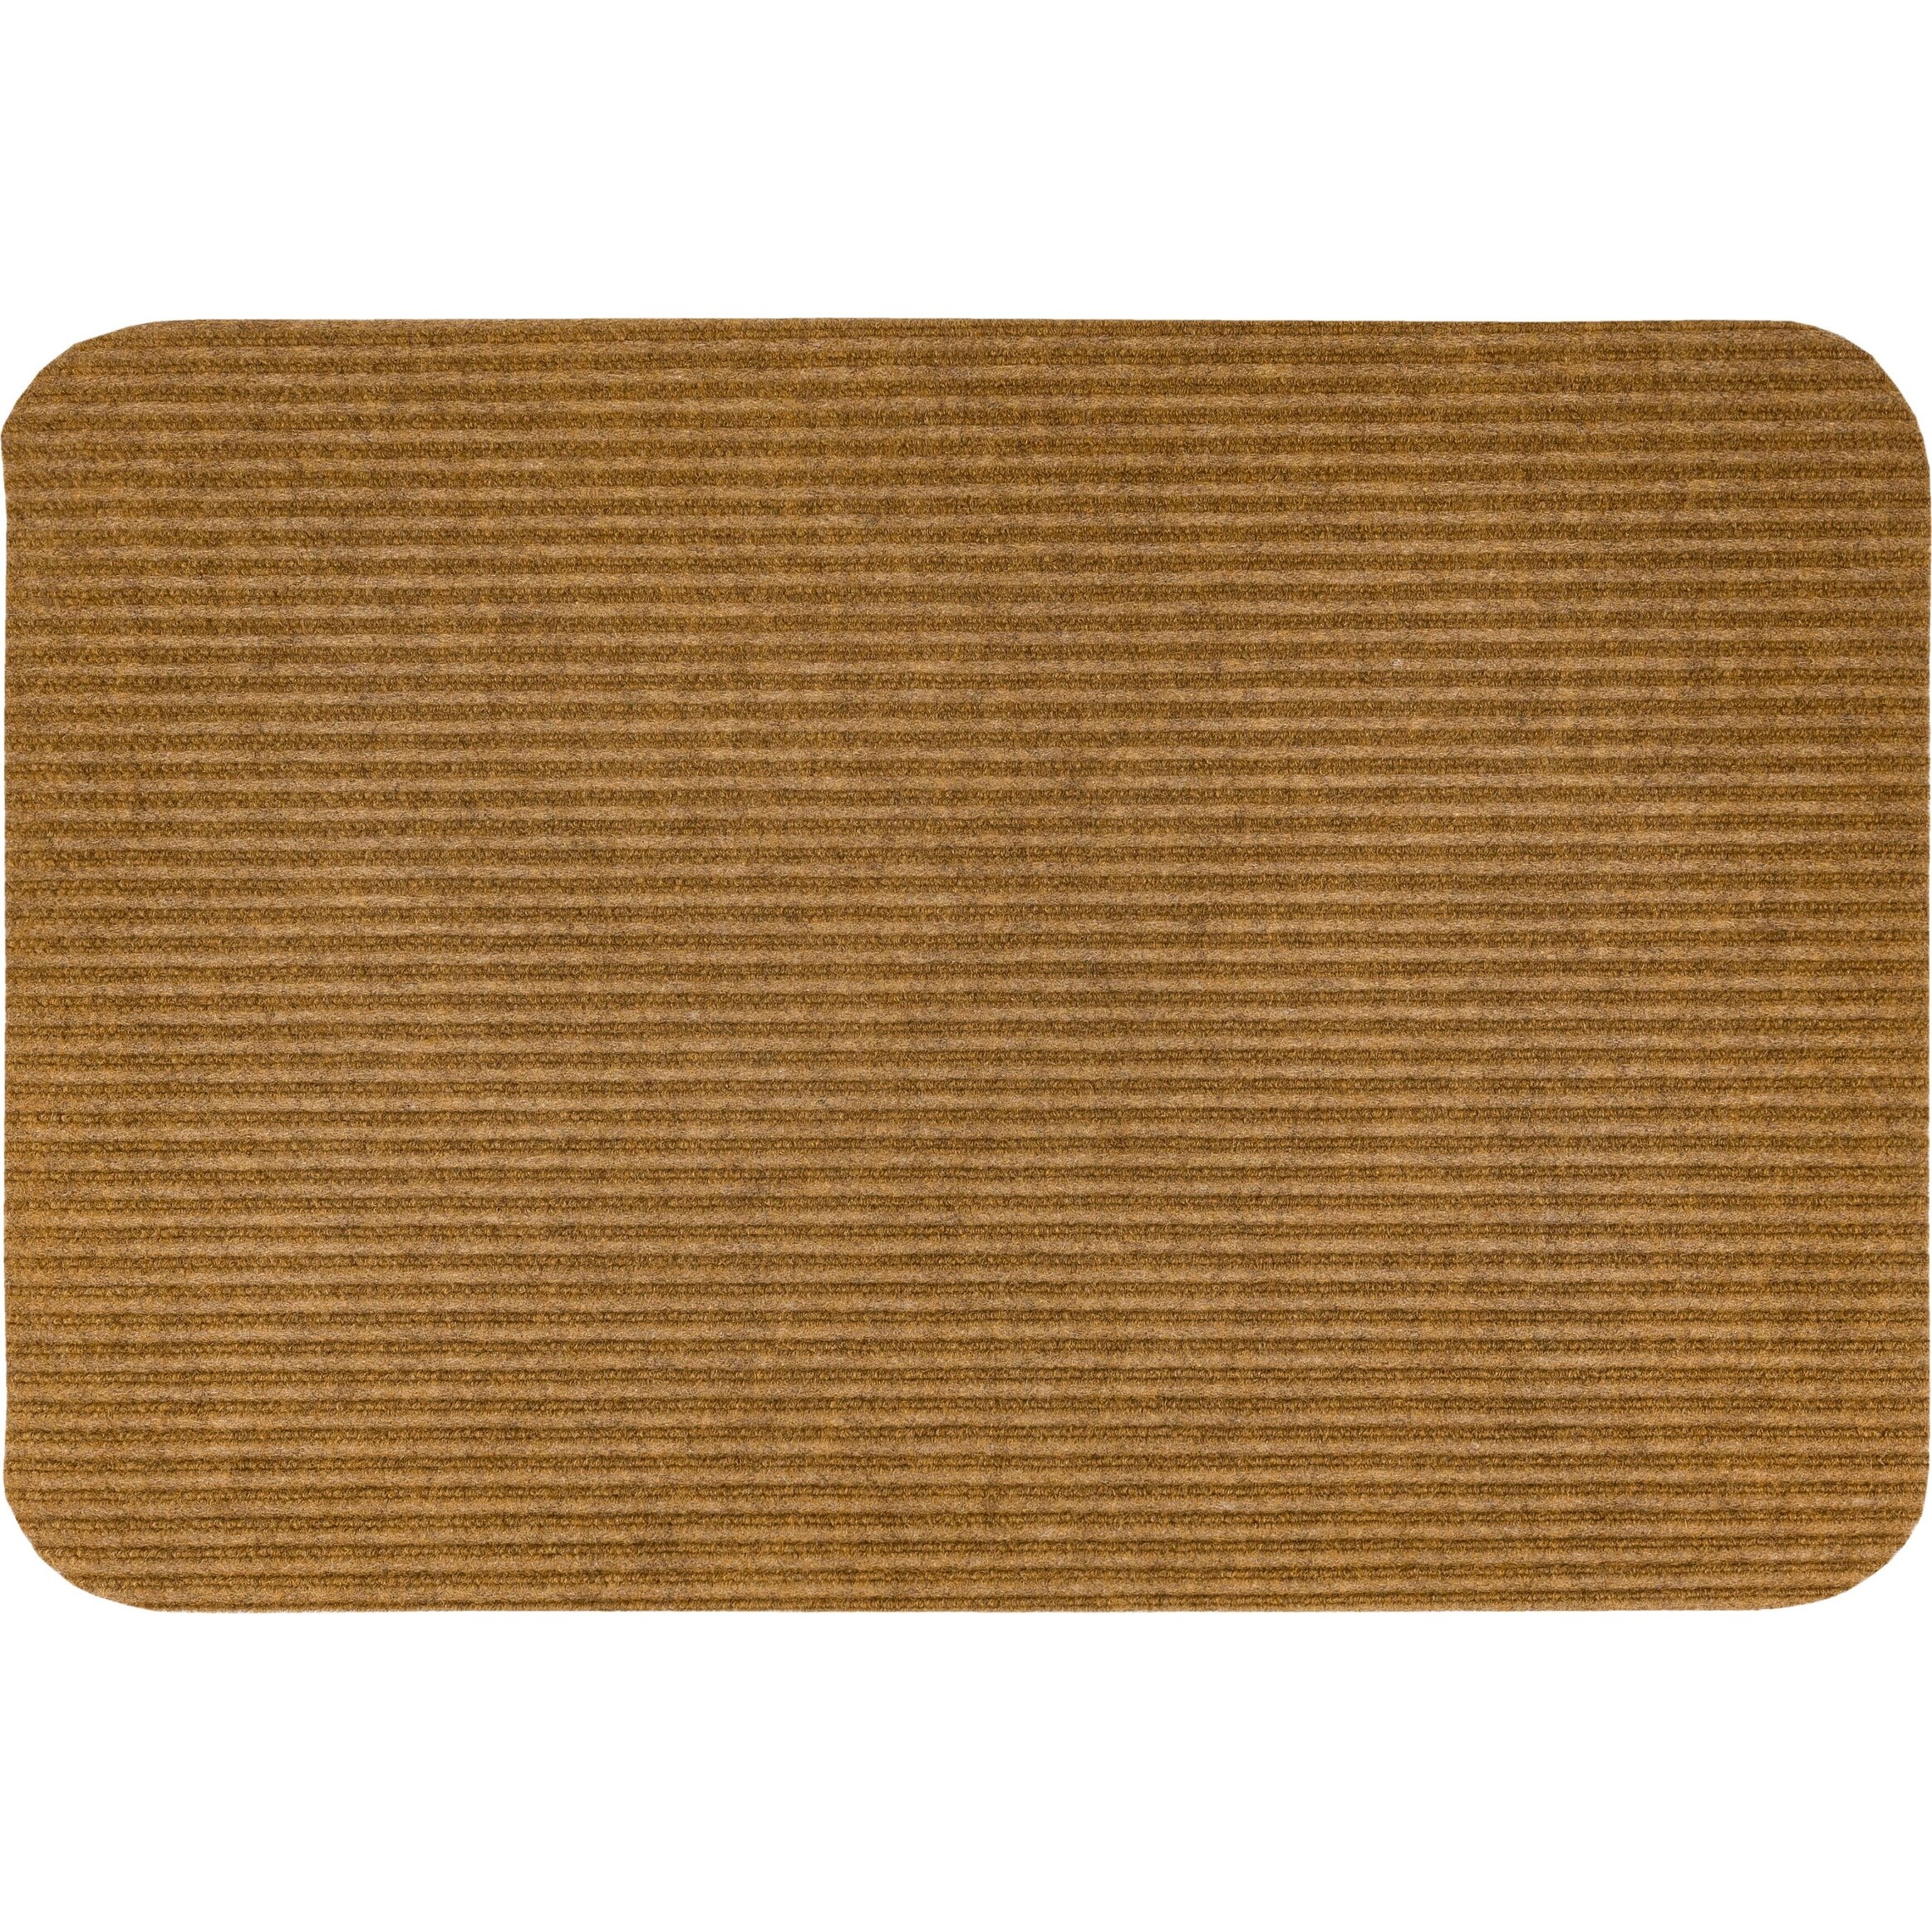 https://ak1.ostkcdn.com/images/products/is/images/direct/9d6e532033f0866c715eb52d5e53428fc905d357/Mohawk-Home-Utility-Floor-Mat-for-Garage%2C-Entryway%2C-Porch%2C-and-Laundry-Room.jpg